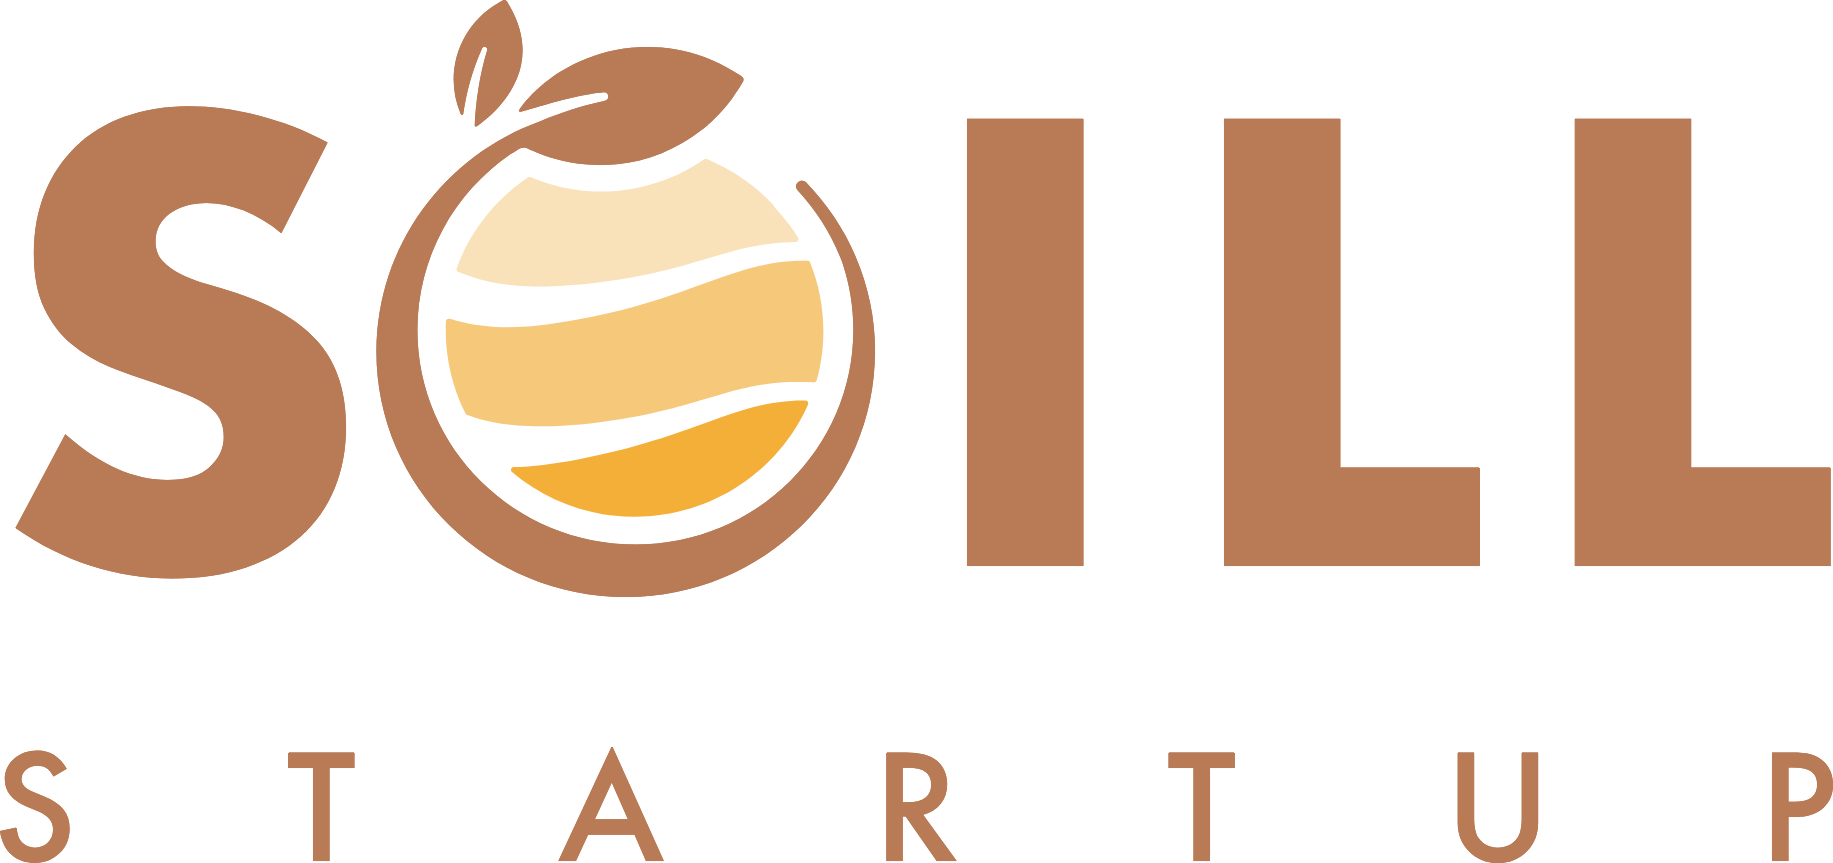 SOILL Startup project logo